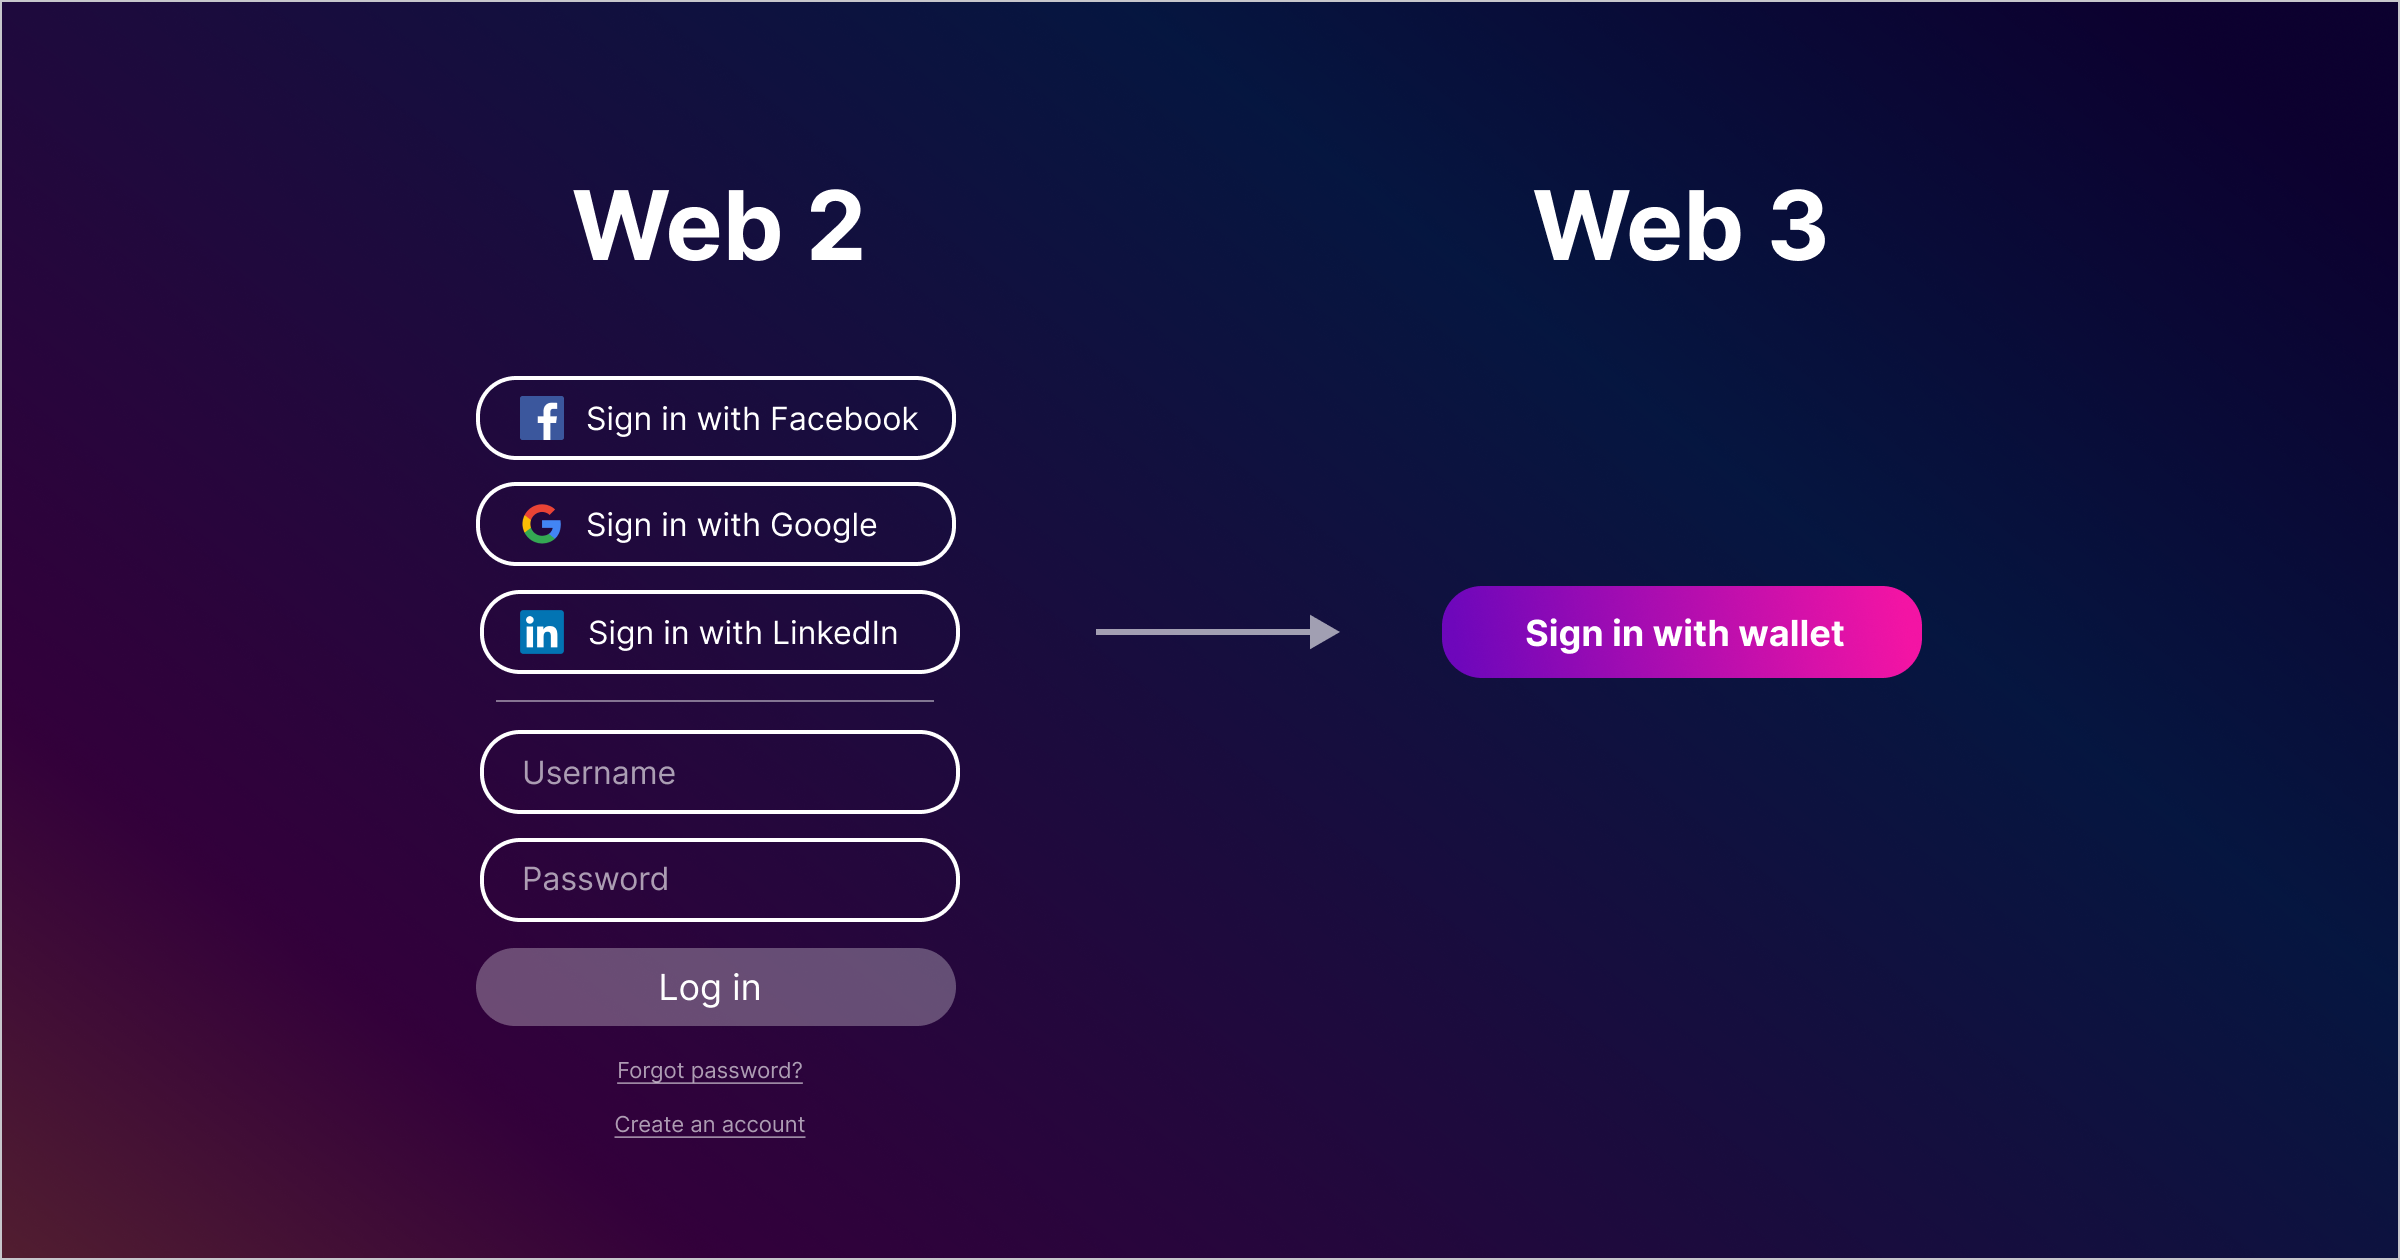 Facebook Social Login with Web3Auth, Documentation